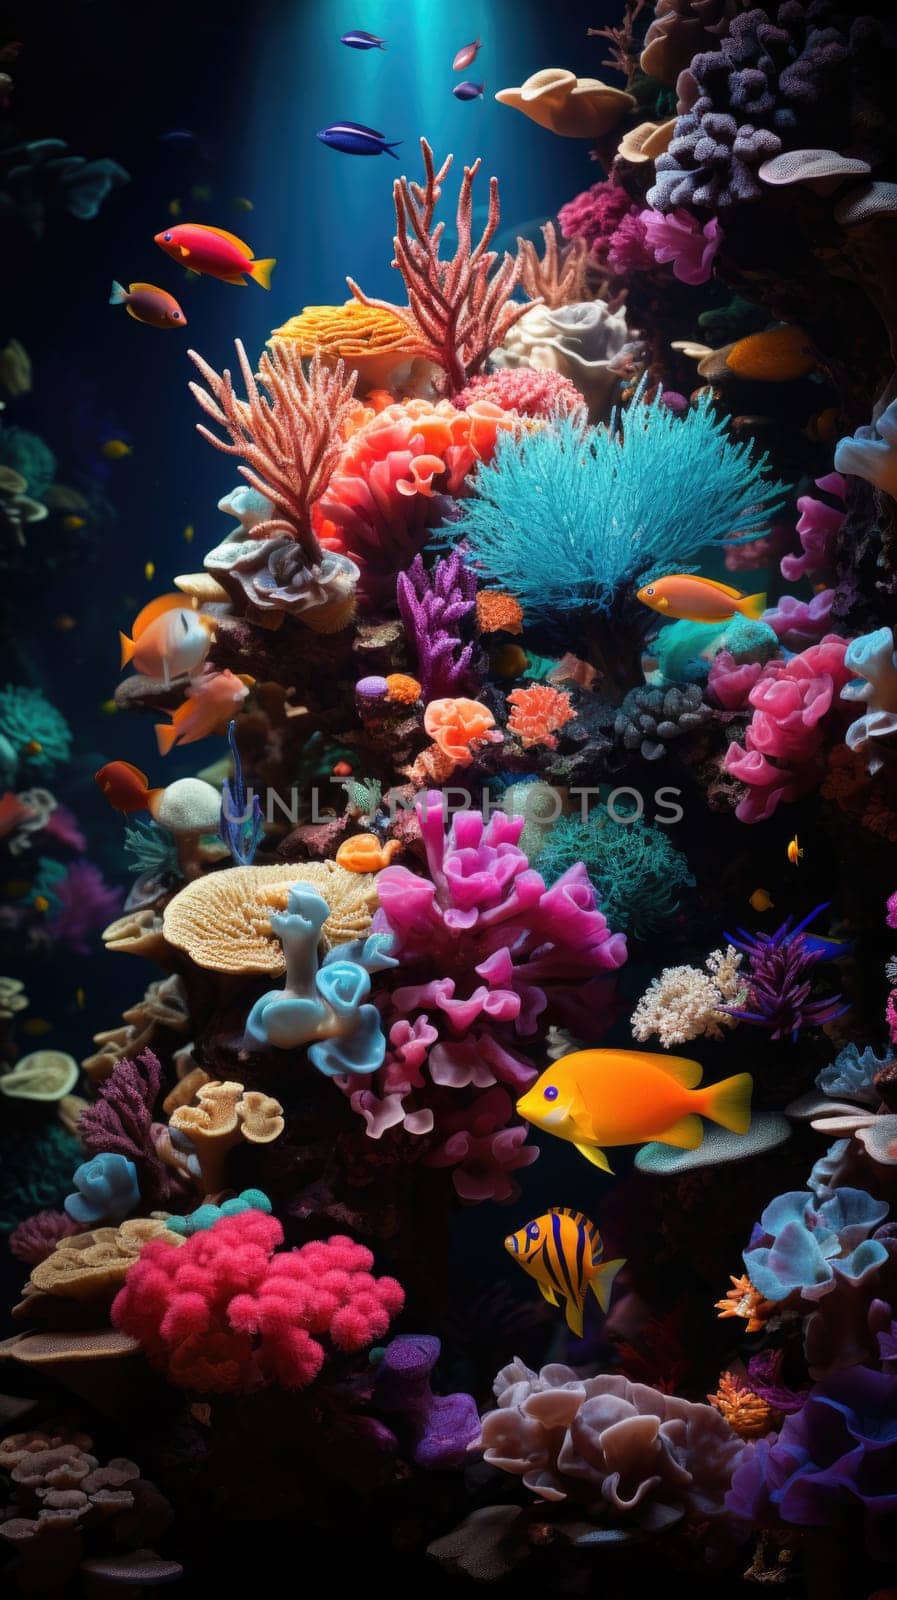 Colorful Fish Swimming in Large Aquarium by but_photo